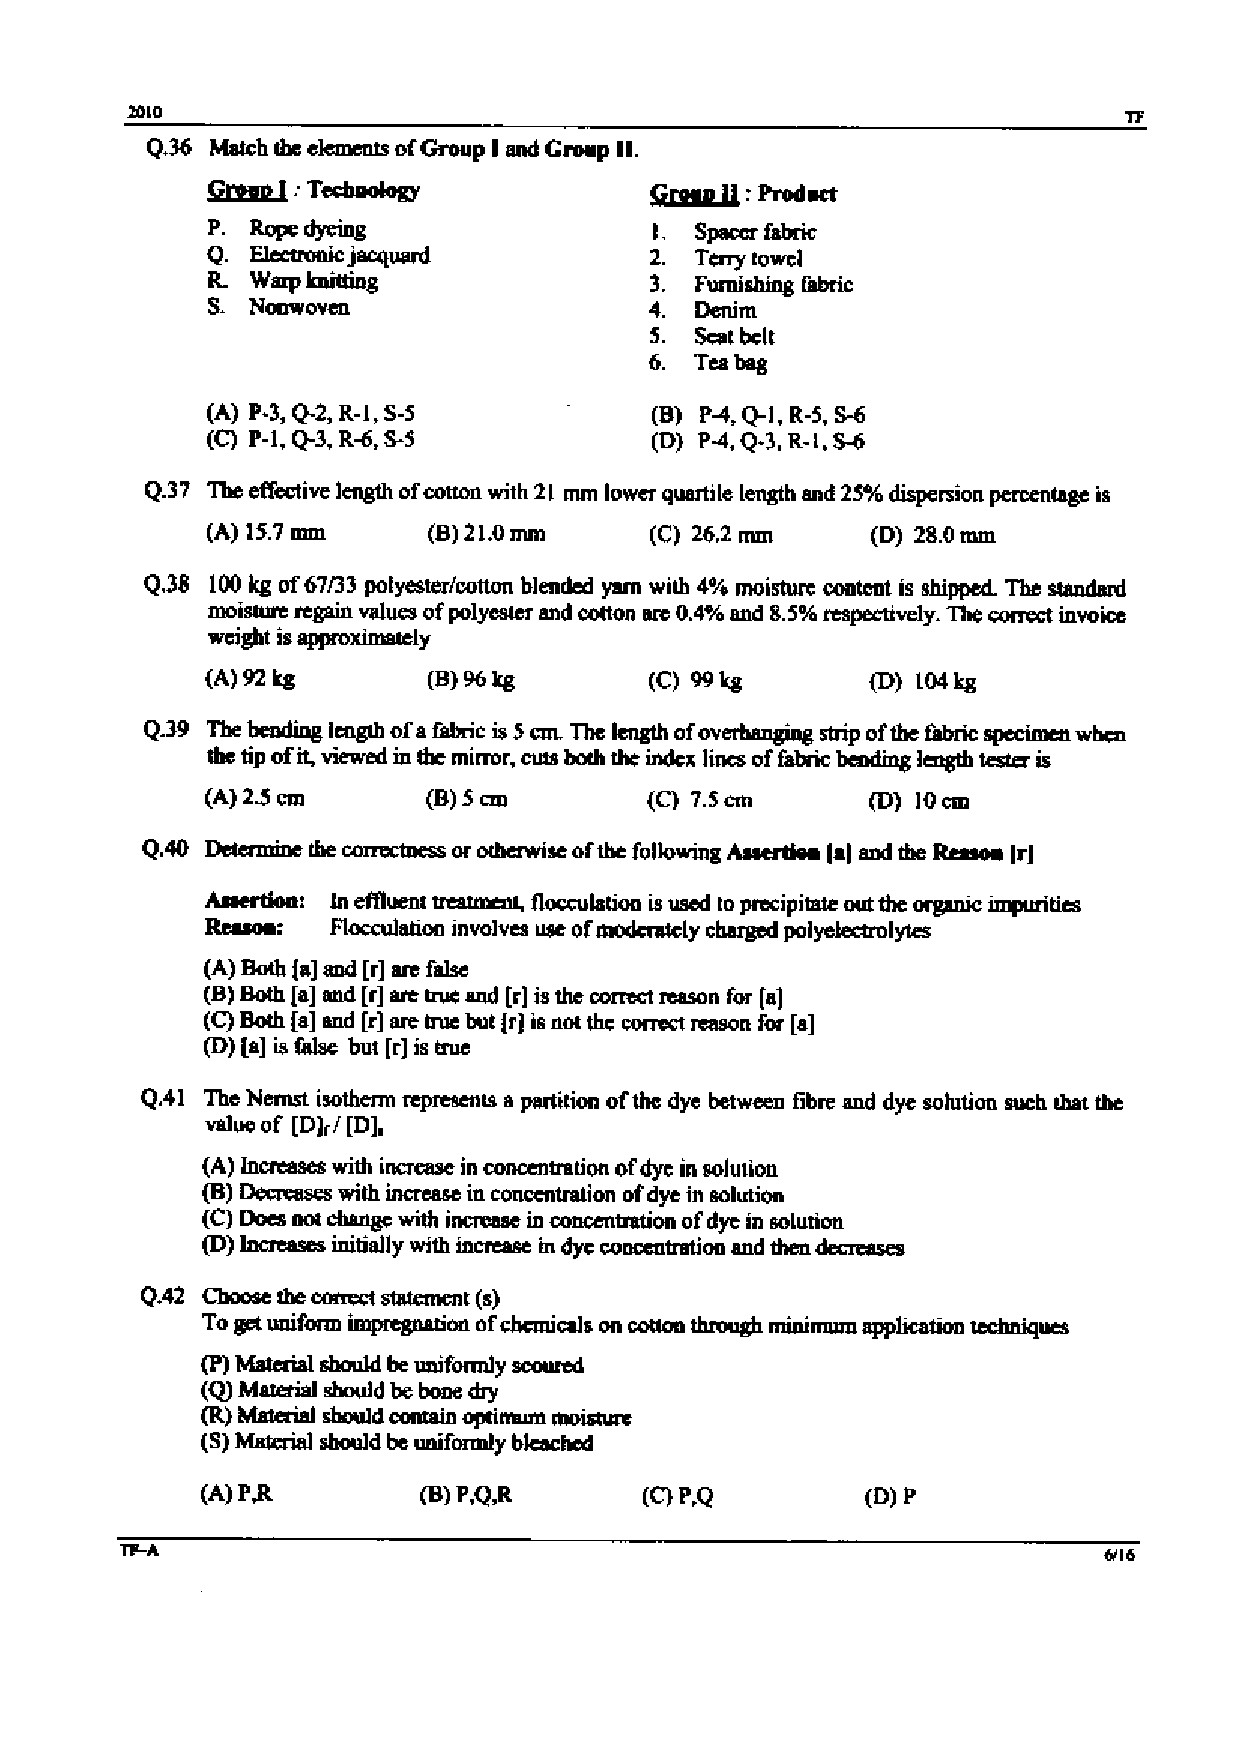 GATE Exam Question Paper 2010 Textile Engineering and Fibre Science 6